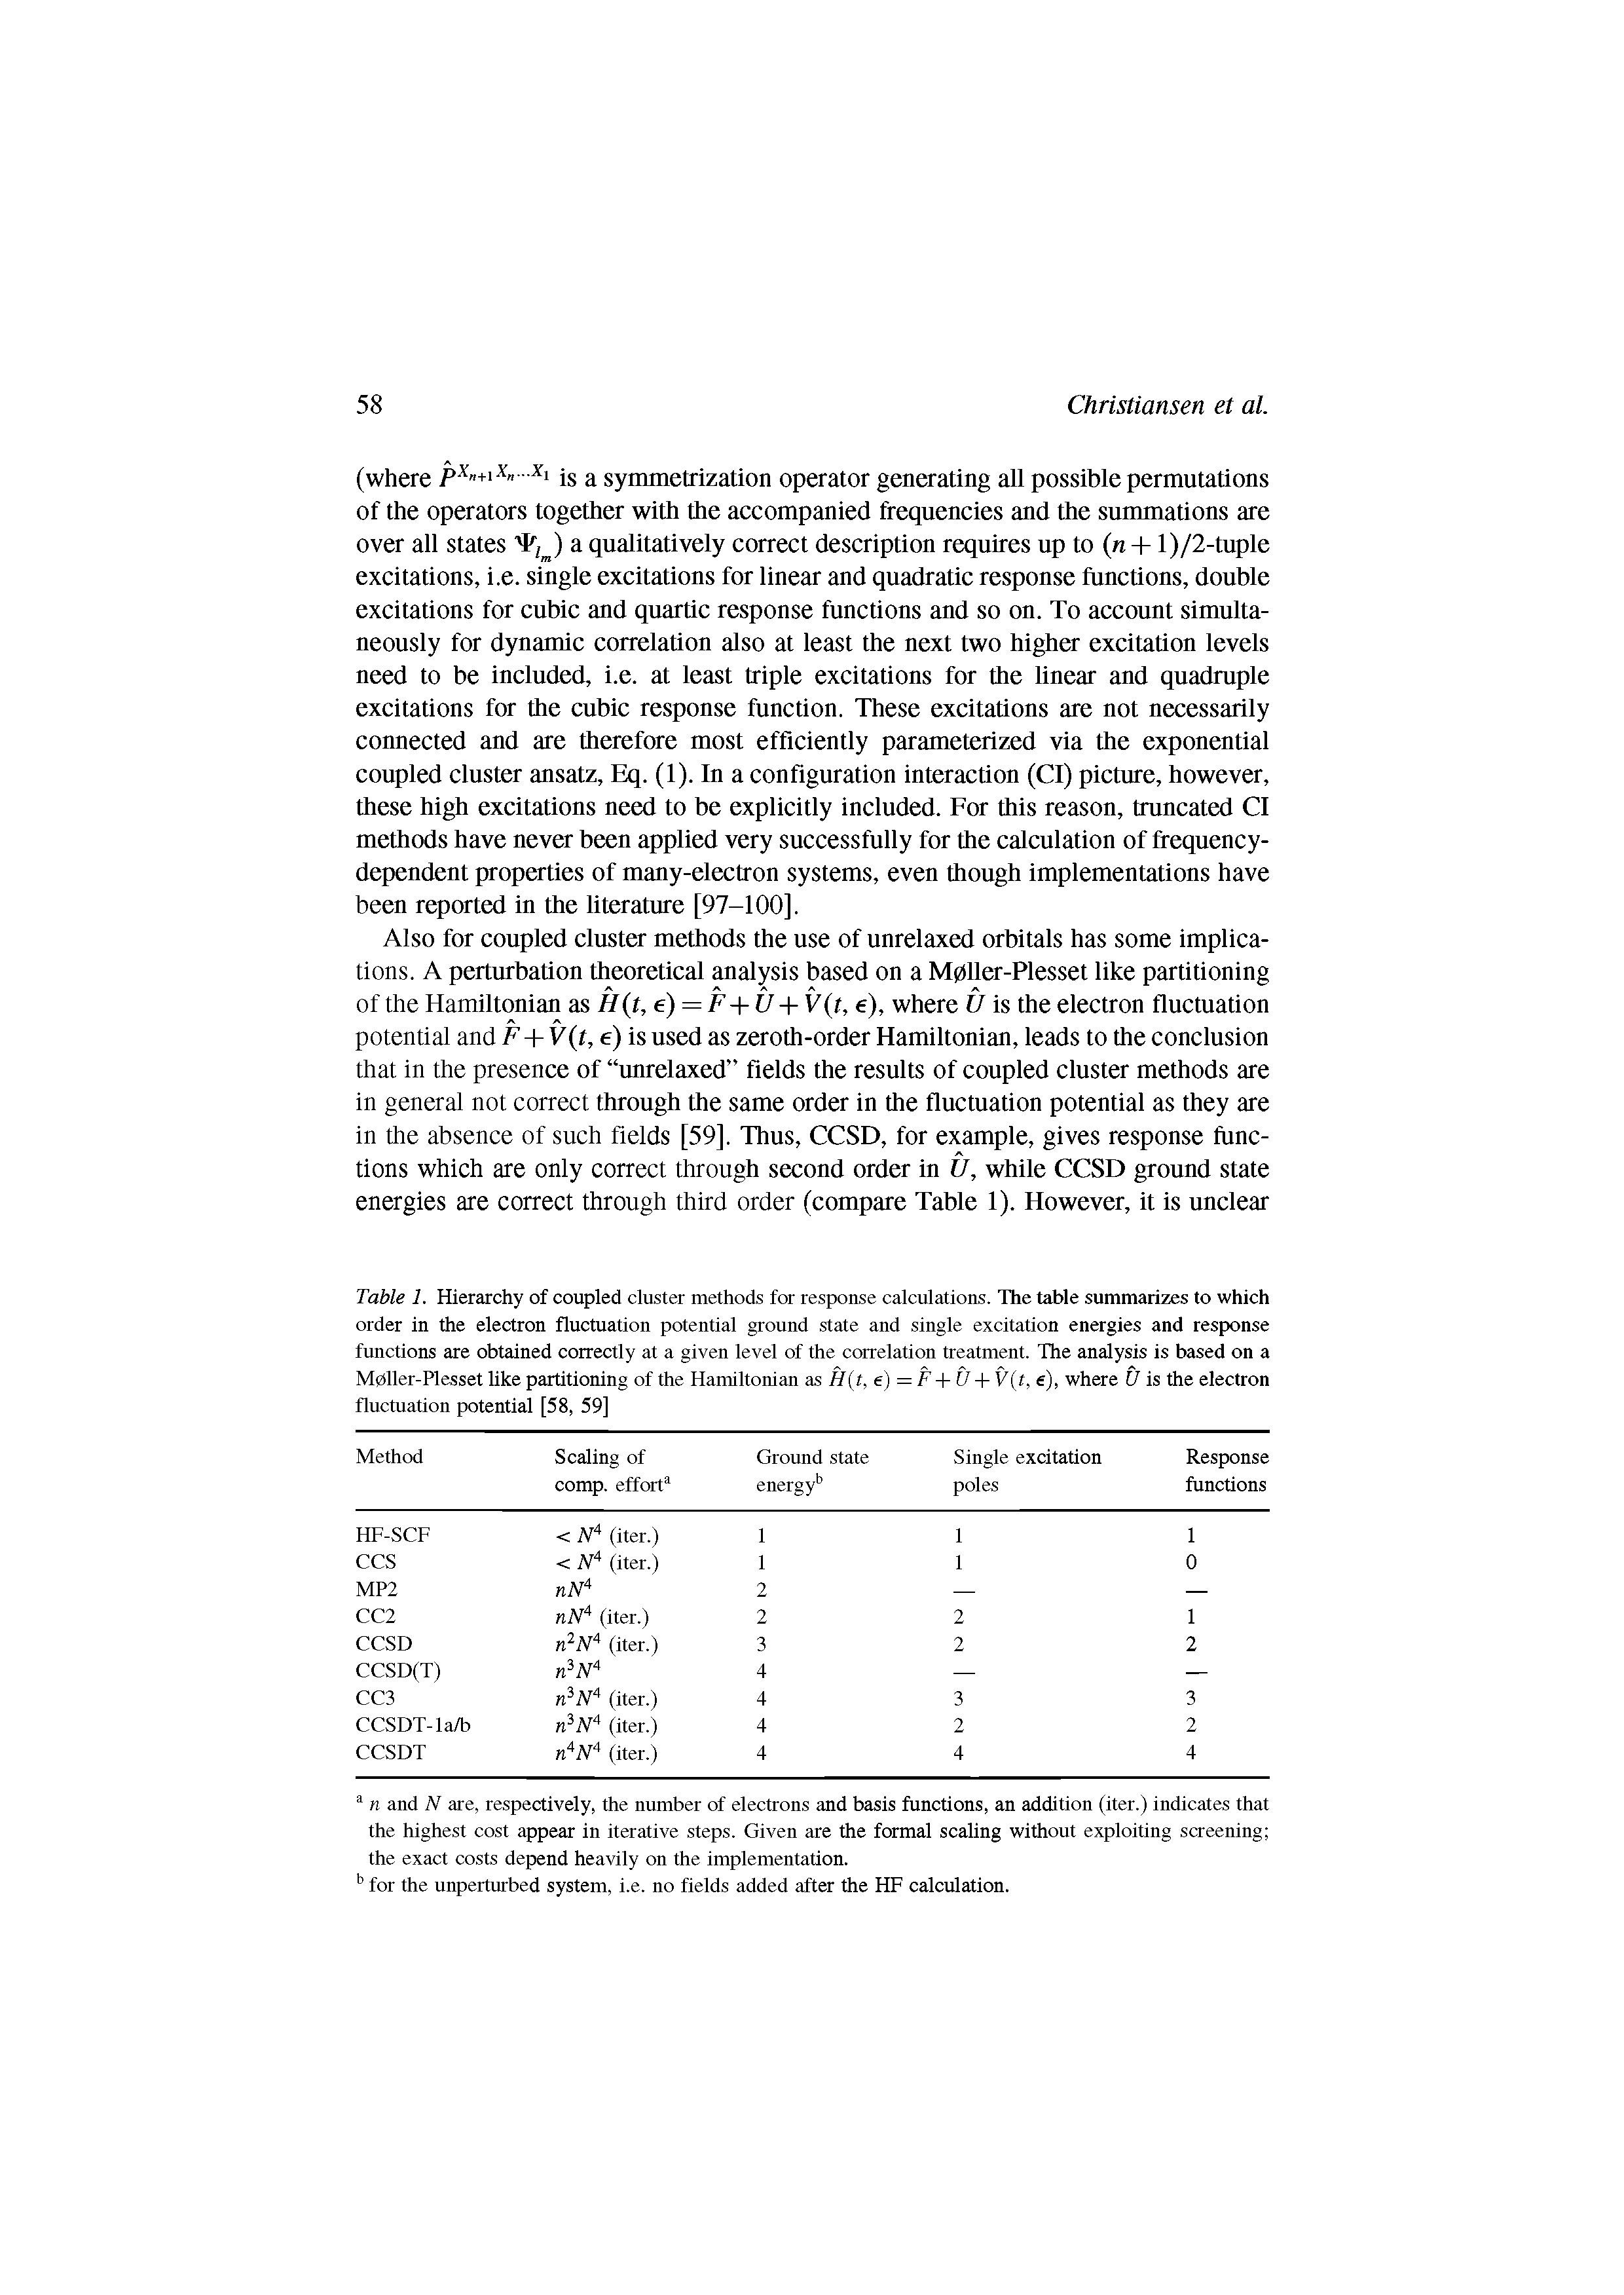 Table 1. Hierarchy of coupled cluster methods for response calculations. The table summarizes to which order in the electron fluctuation potential ground state and single excitation energies and response functions are obtained correctly at a given level of the correlation treatment. The analysis is based on a Mpller-Plesset like partitioning of the Hamiltonian as H(t, e) = F+ U + V t, e), where U is the electron fluctuation potential [58, 59]...